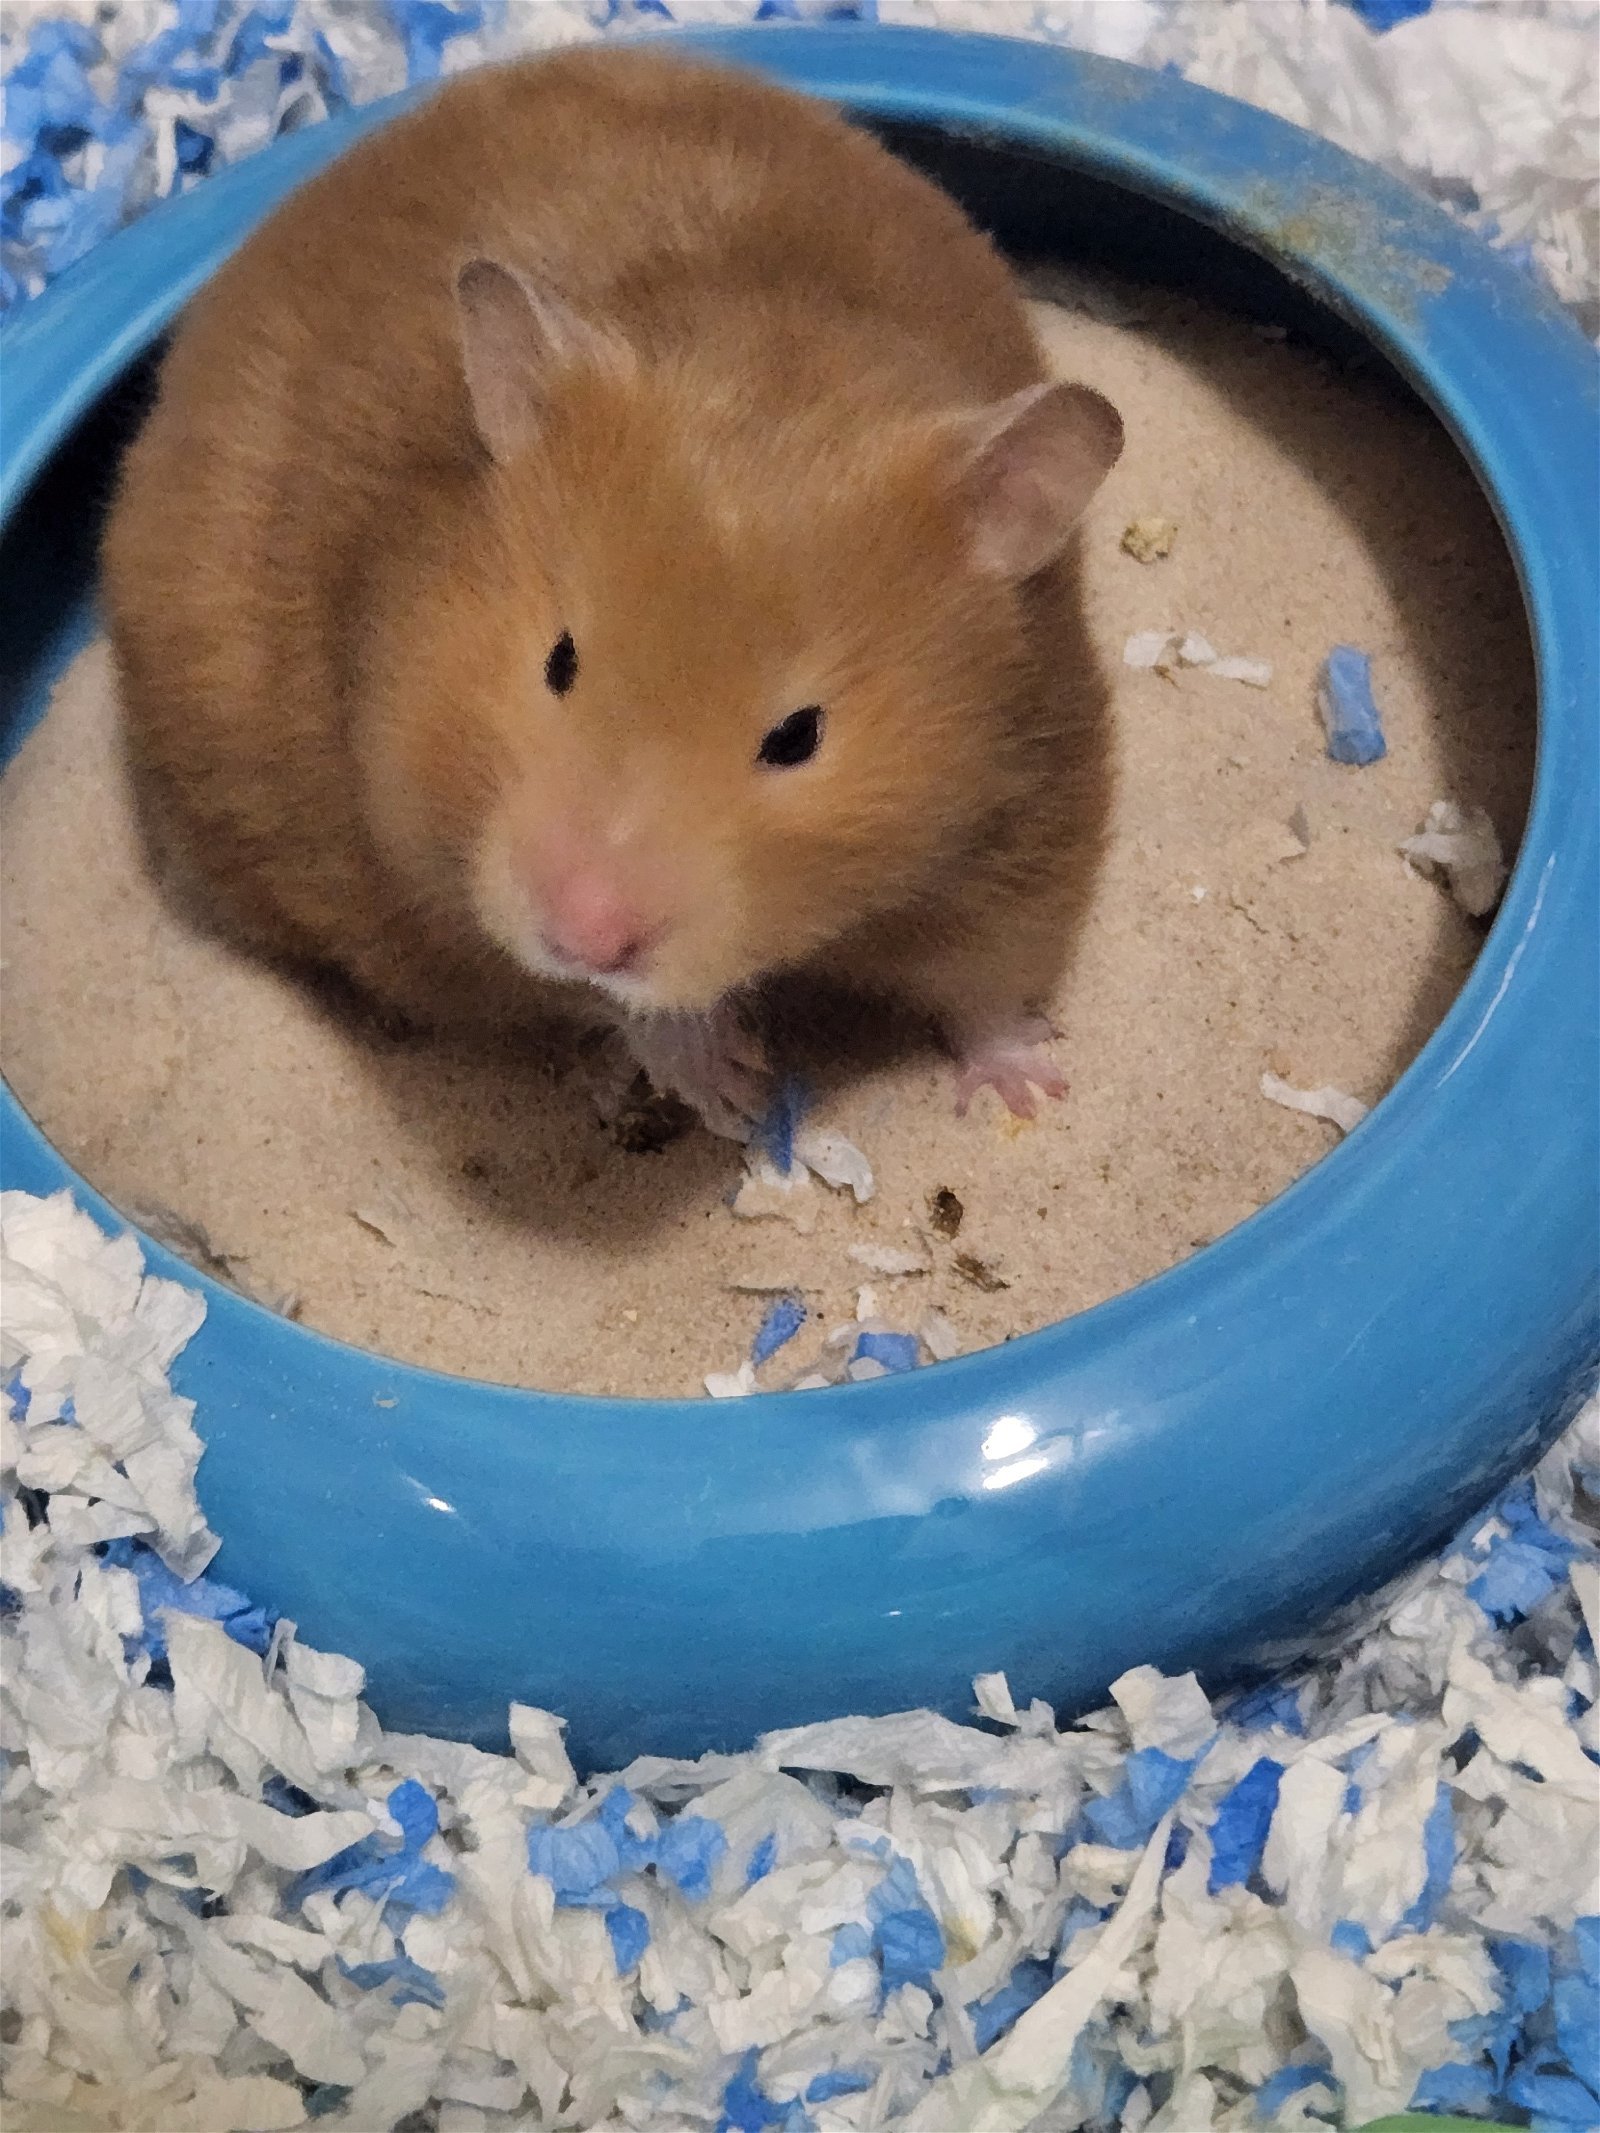 Shelter Dogs of Portland: BABY HAMSTERS - nice easy little pets